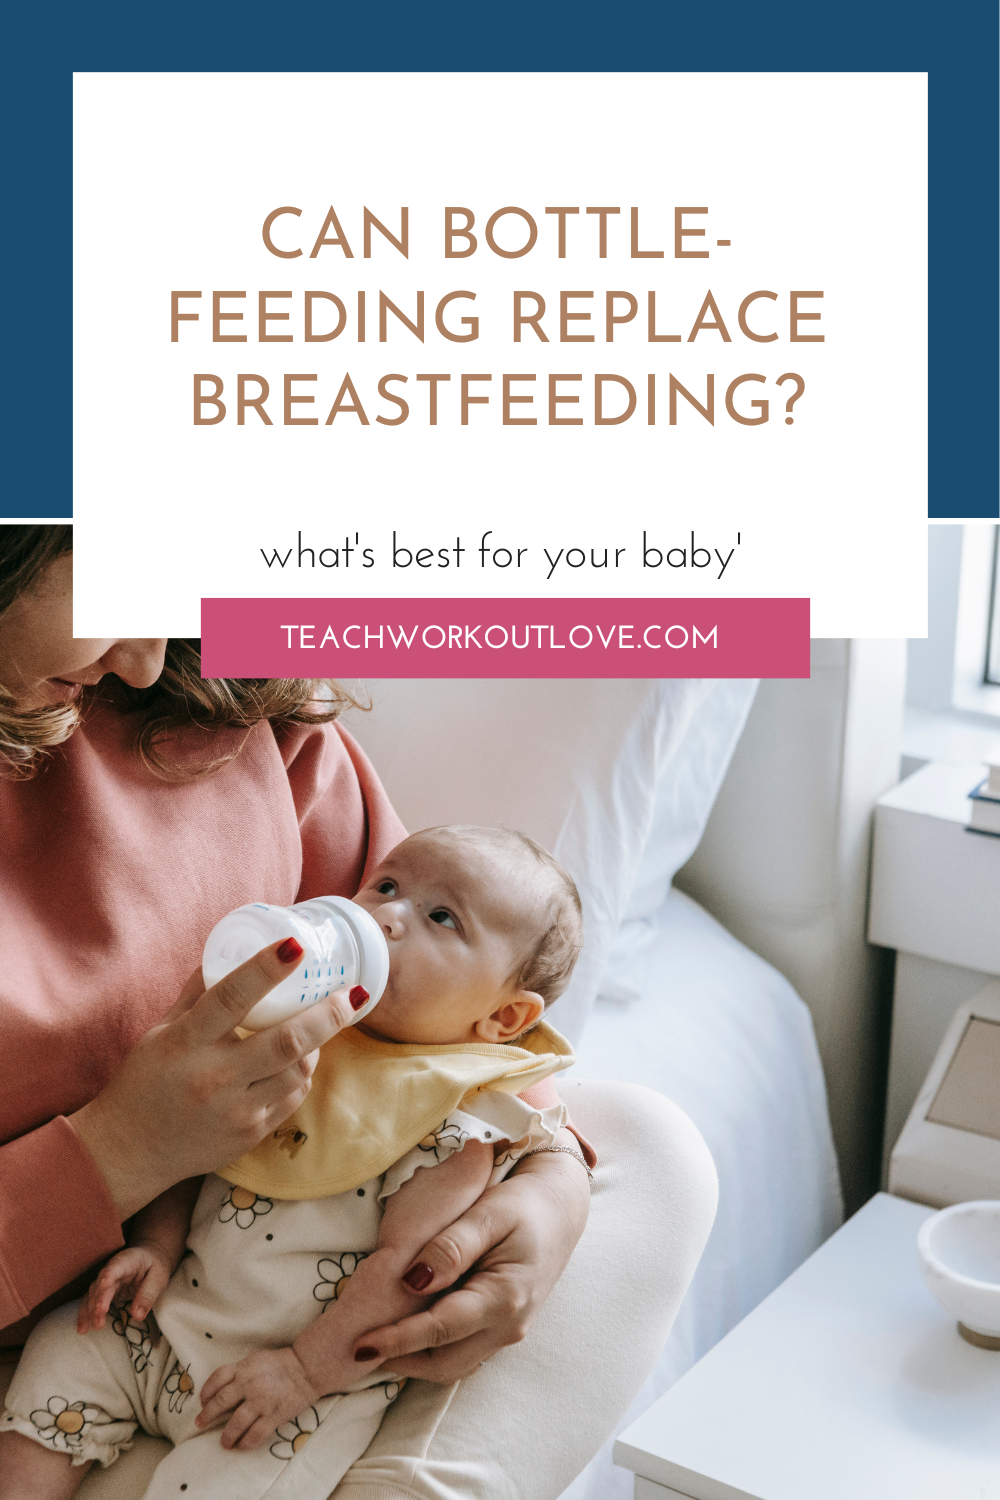 Have you had a baby recently and are bottle-feeding? Can baby formula be a good alternative to mother's breast milk? Let's figure it out.